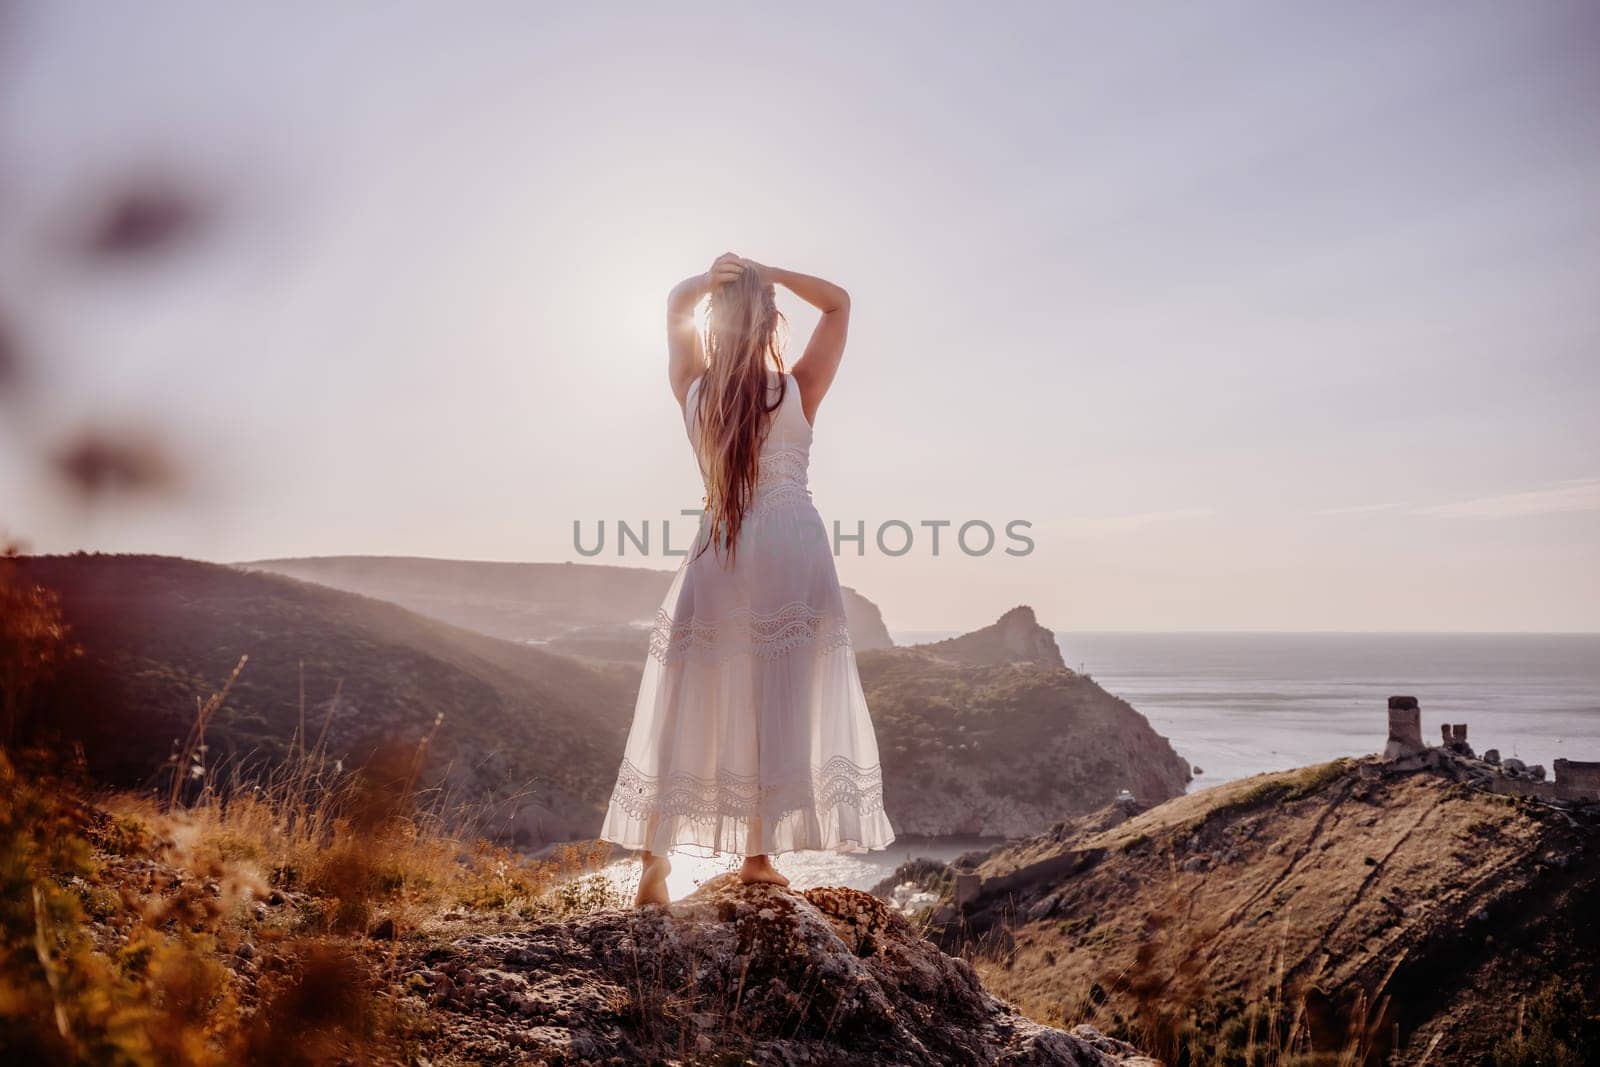 A woman stands on a hill overlooking the ocean. She is wearing a white dress and has her hands on her head. The scene is serene and peaceful, with the woman looking out over the water. by Matiunina